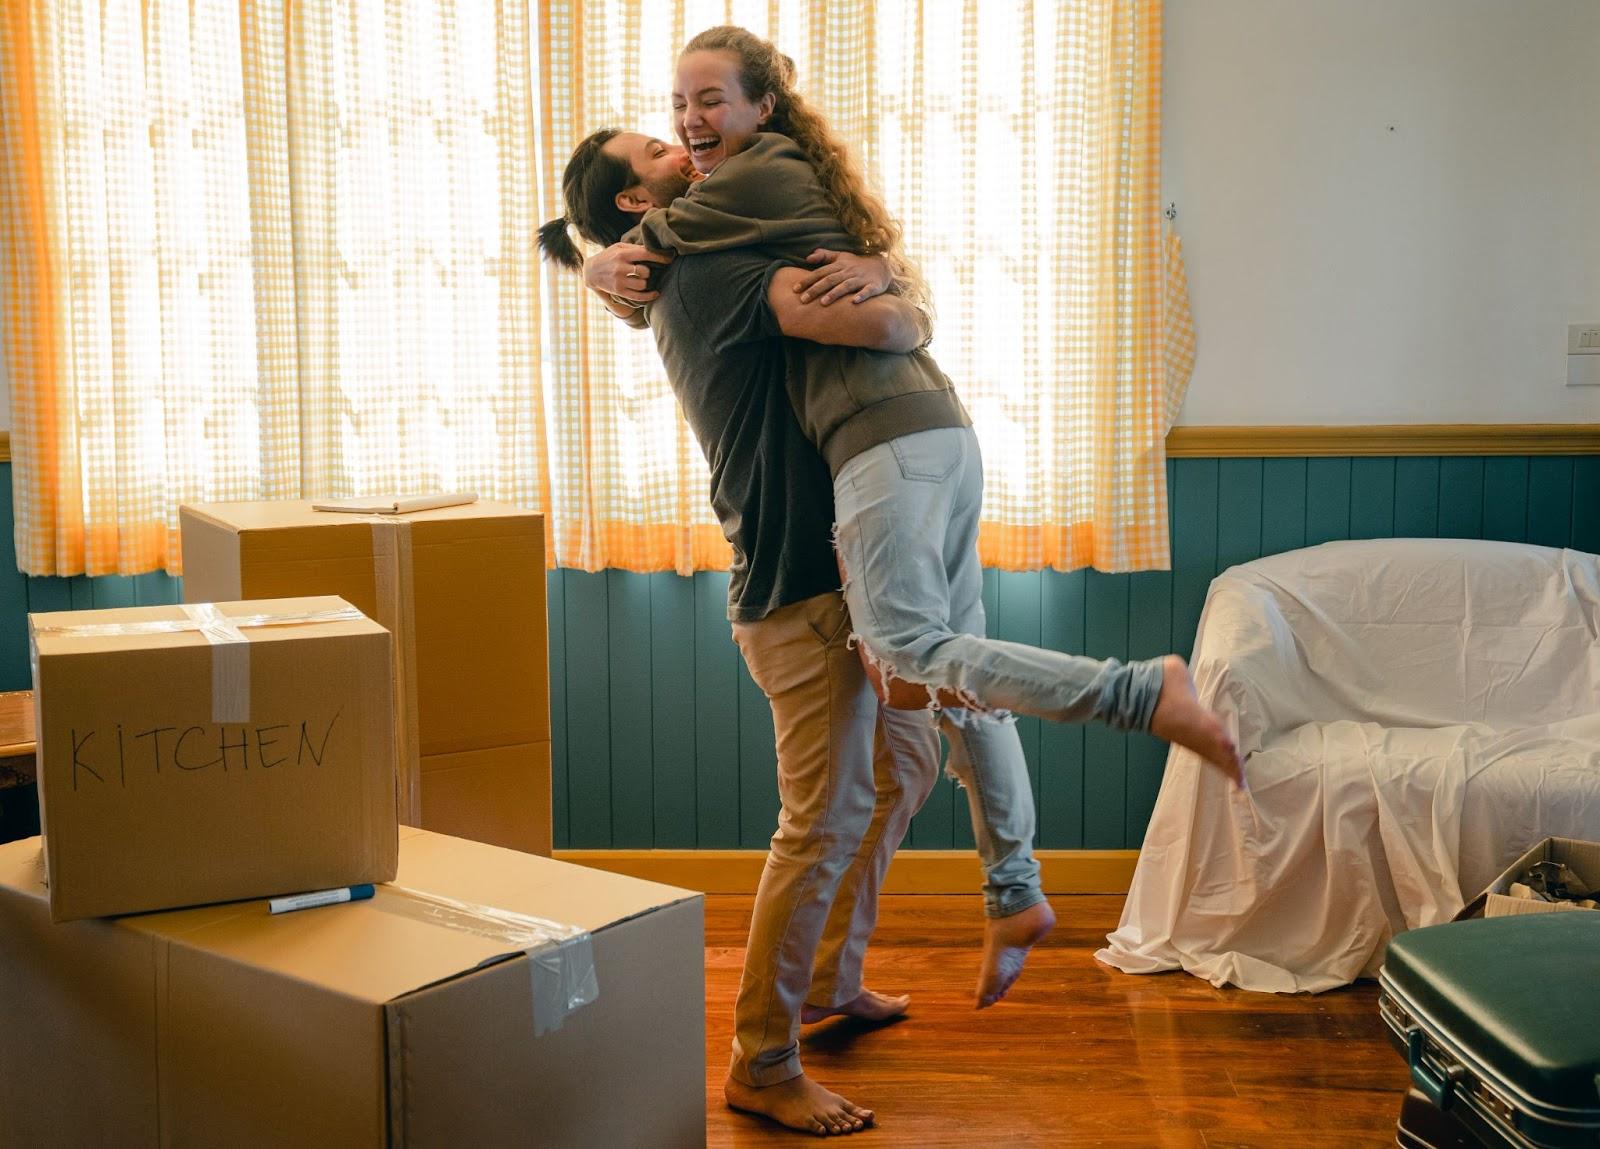 Guy holds a girl in his arms next to boxes of stuff for move-in another house